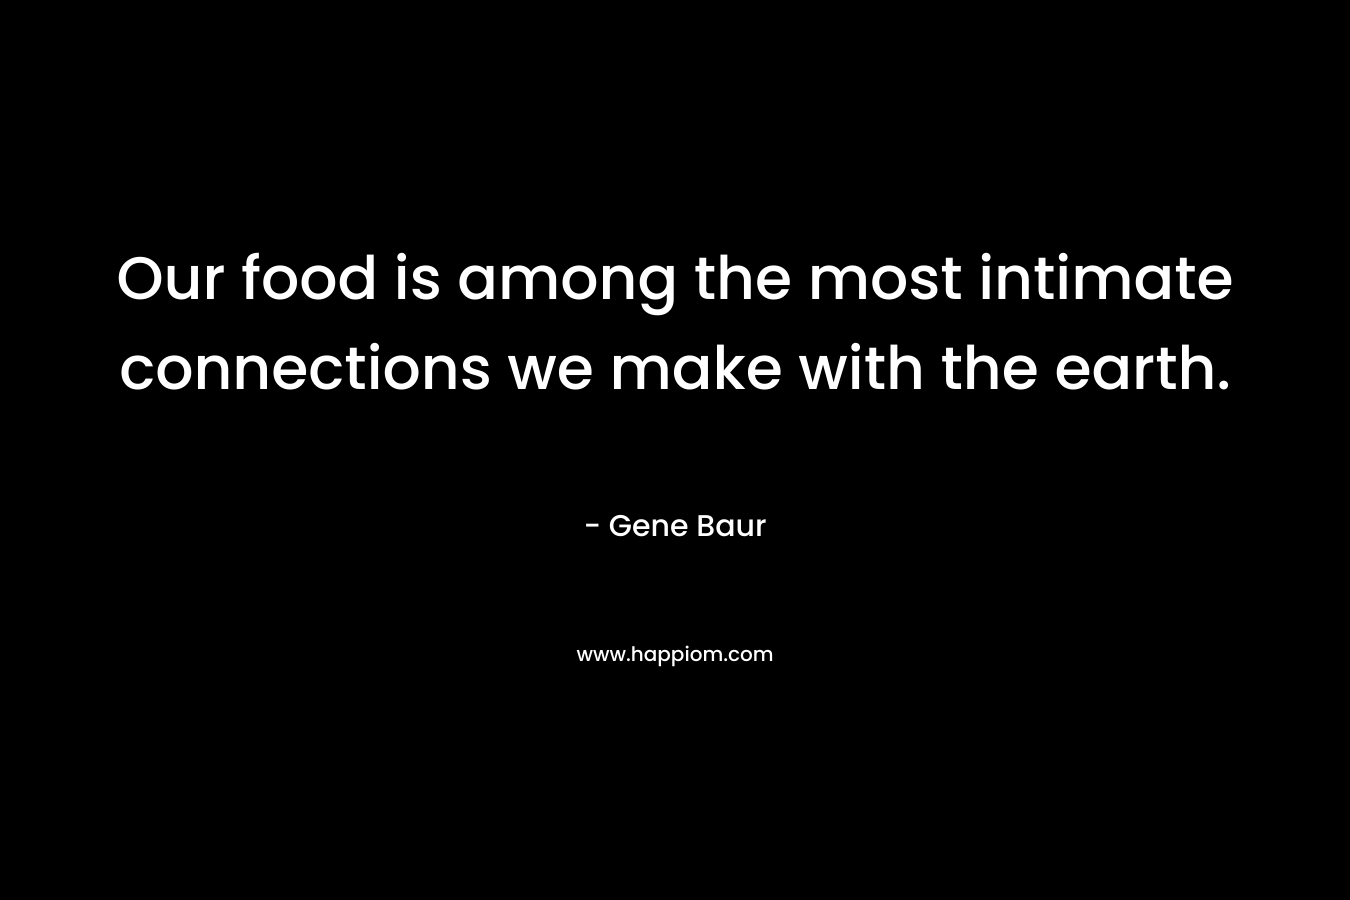 Our food is among the most intimate connections we make with the earth. – Gene Baur